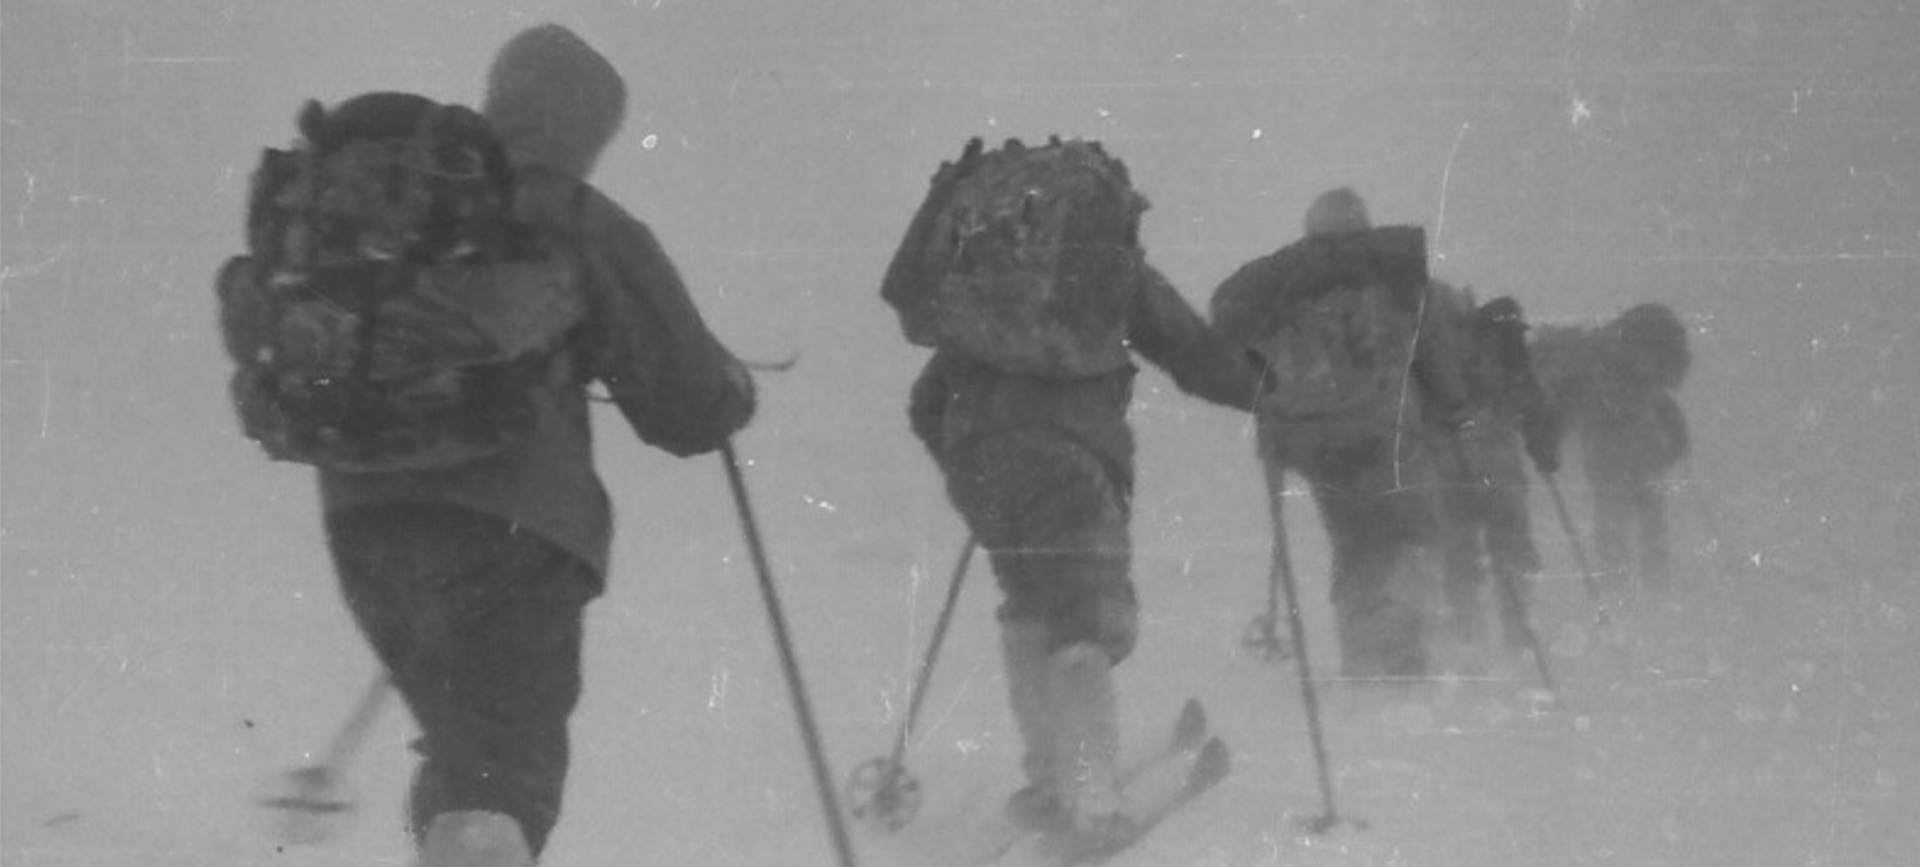 Black and white photo of explorers on cross country skis